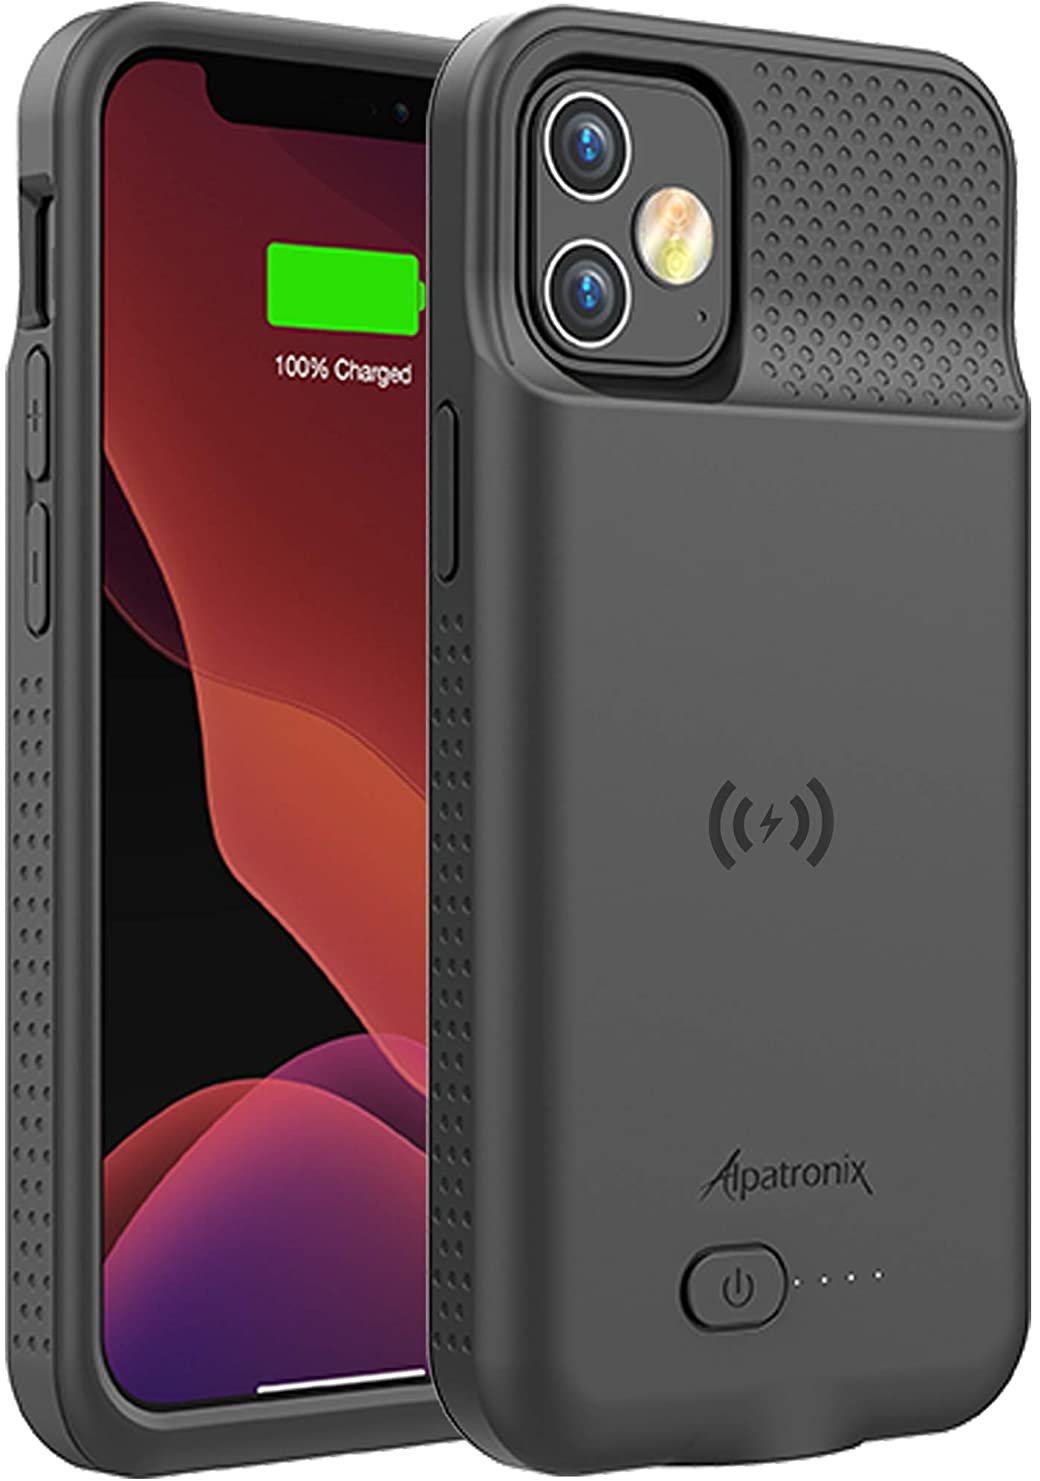 Alpatronix Battery Case For Iphone